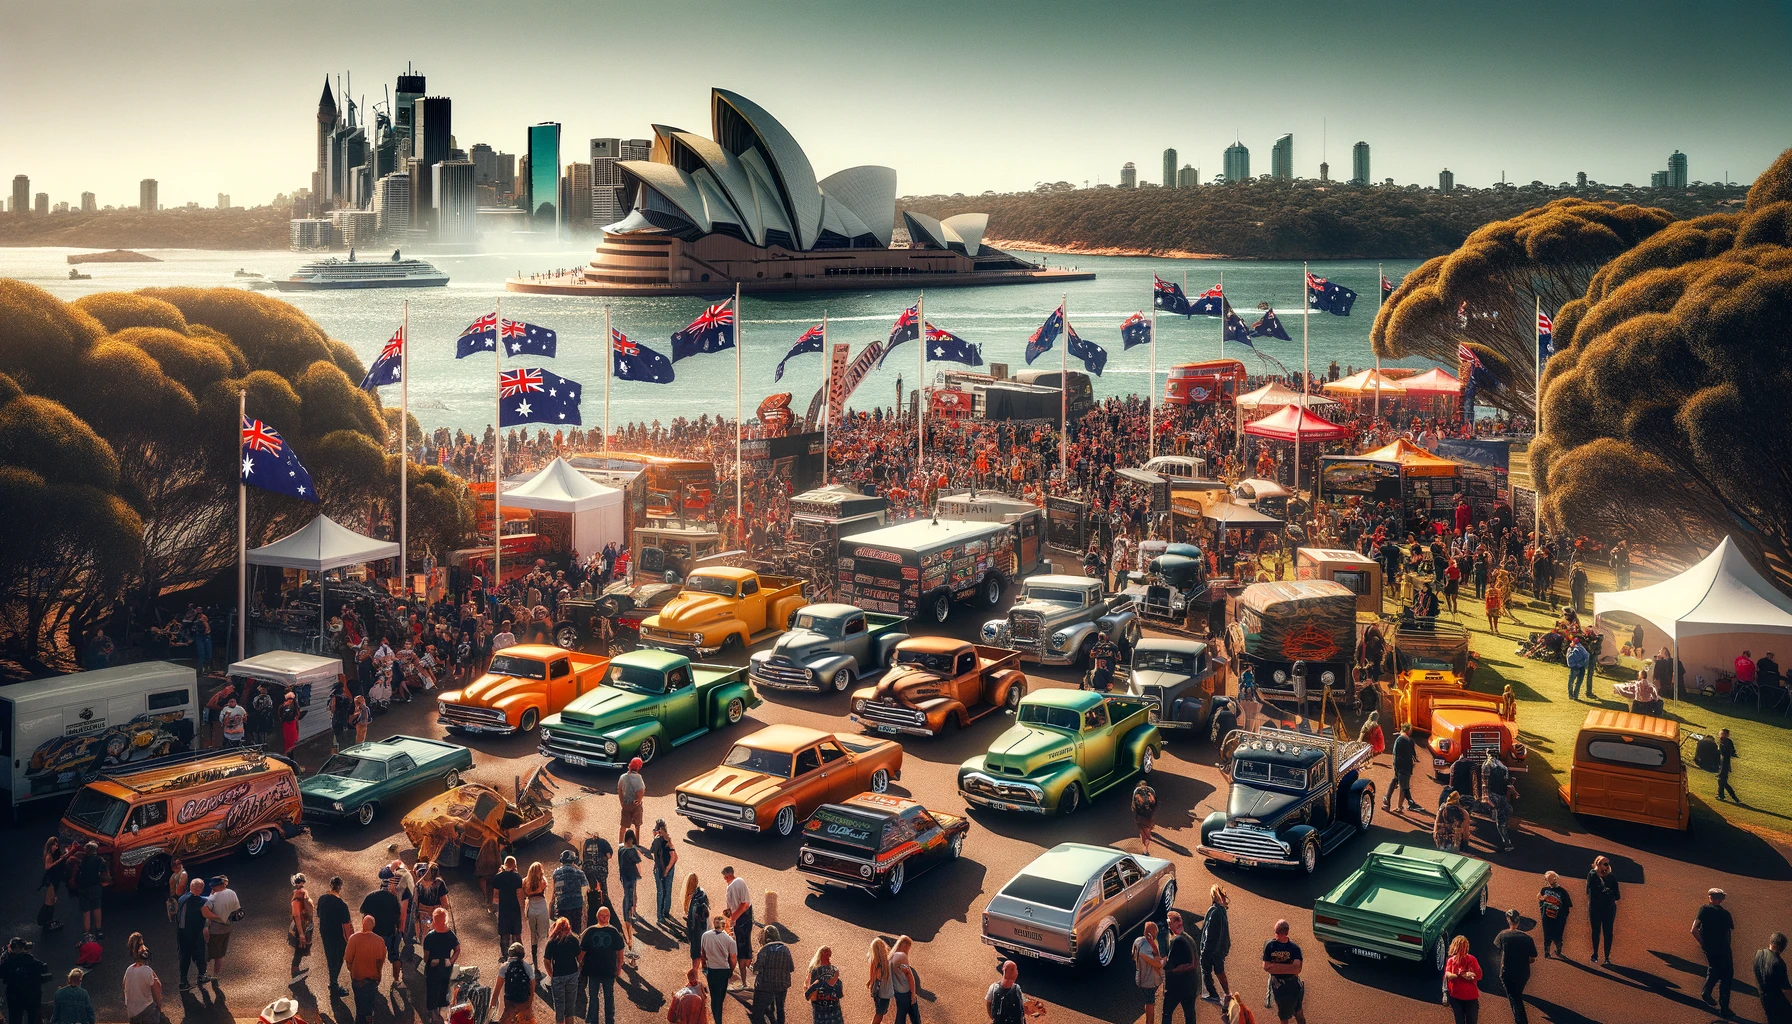 Australian Car Festival Scene with Classic and Modern Cars, Crowds, and Iconic Landmarks